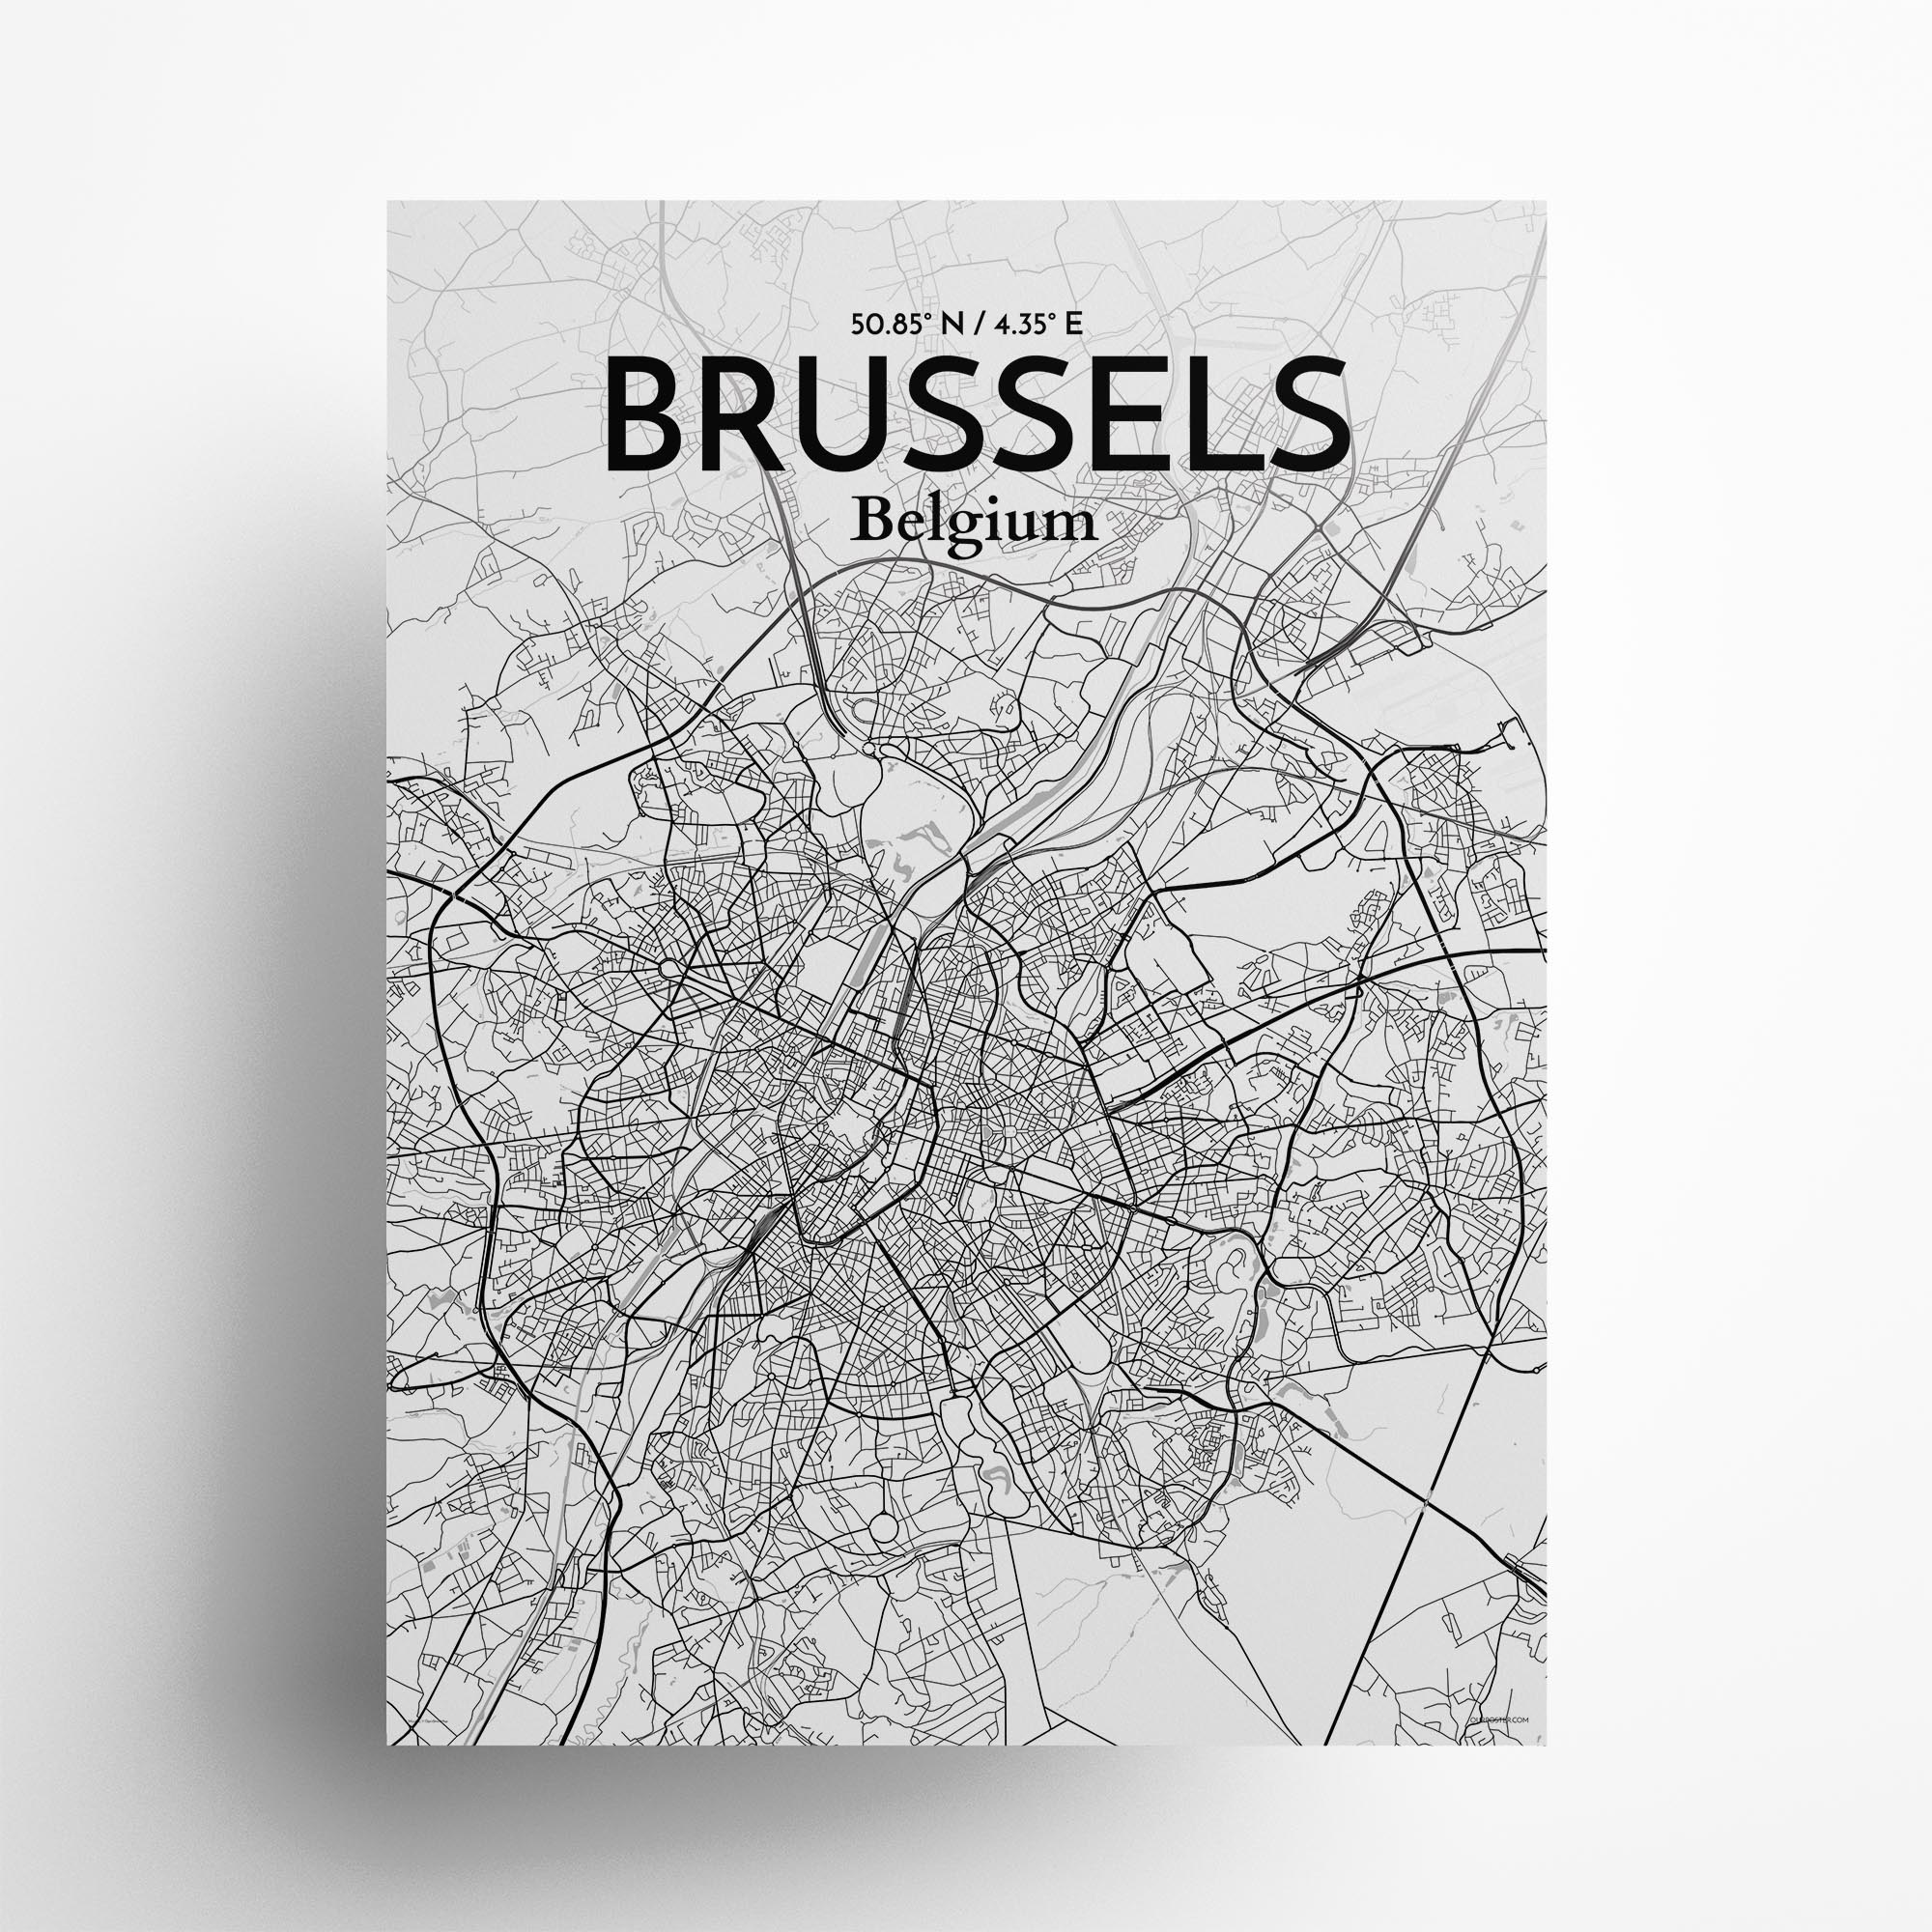 Brussels city map poster in Tones of size 18" x 24"